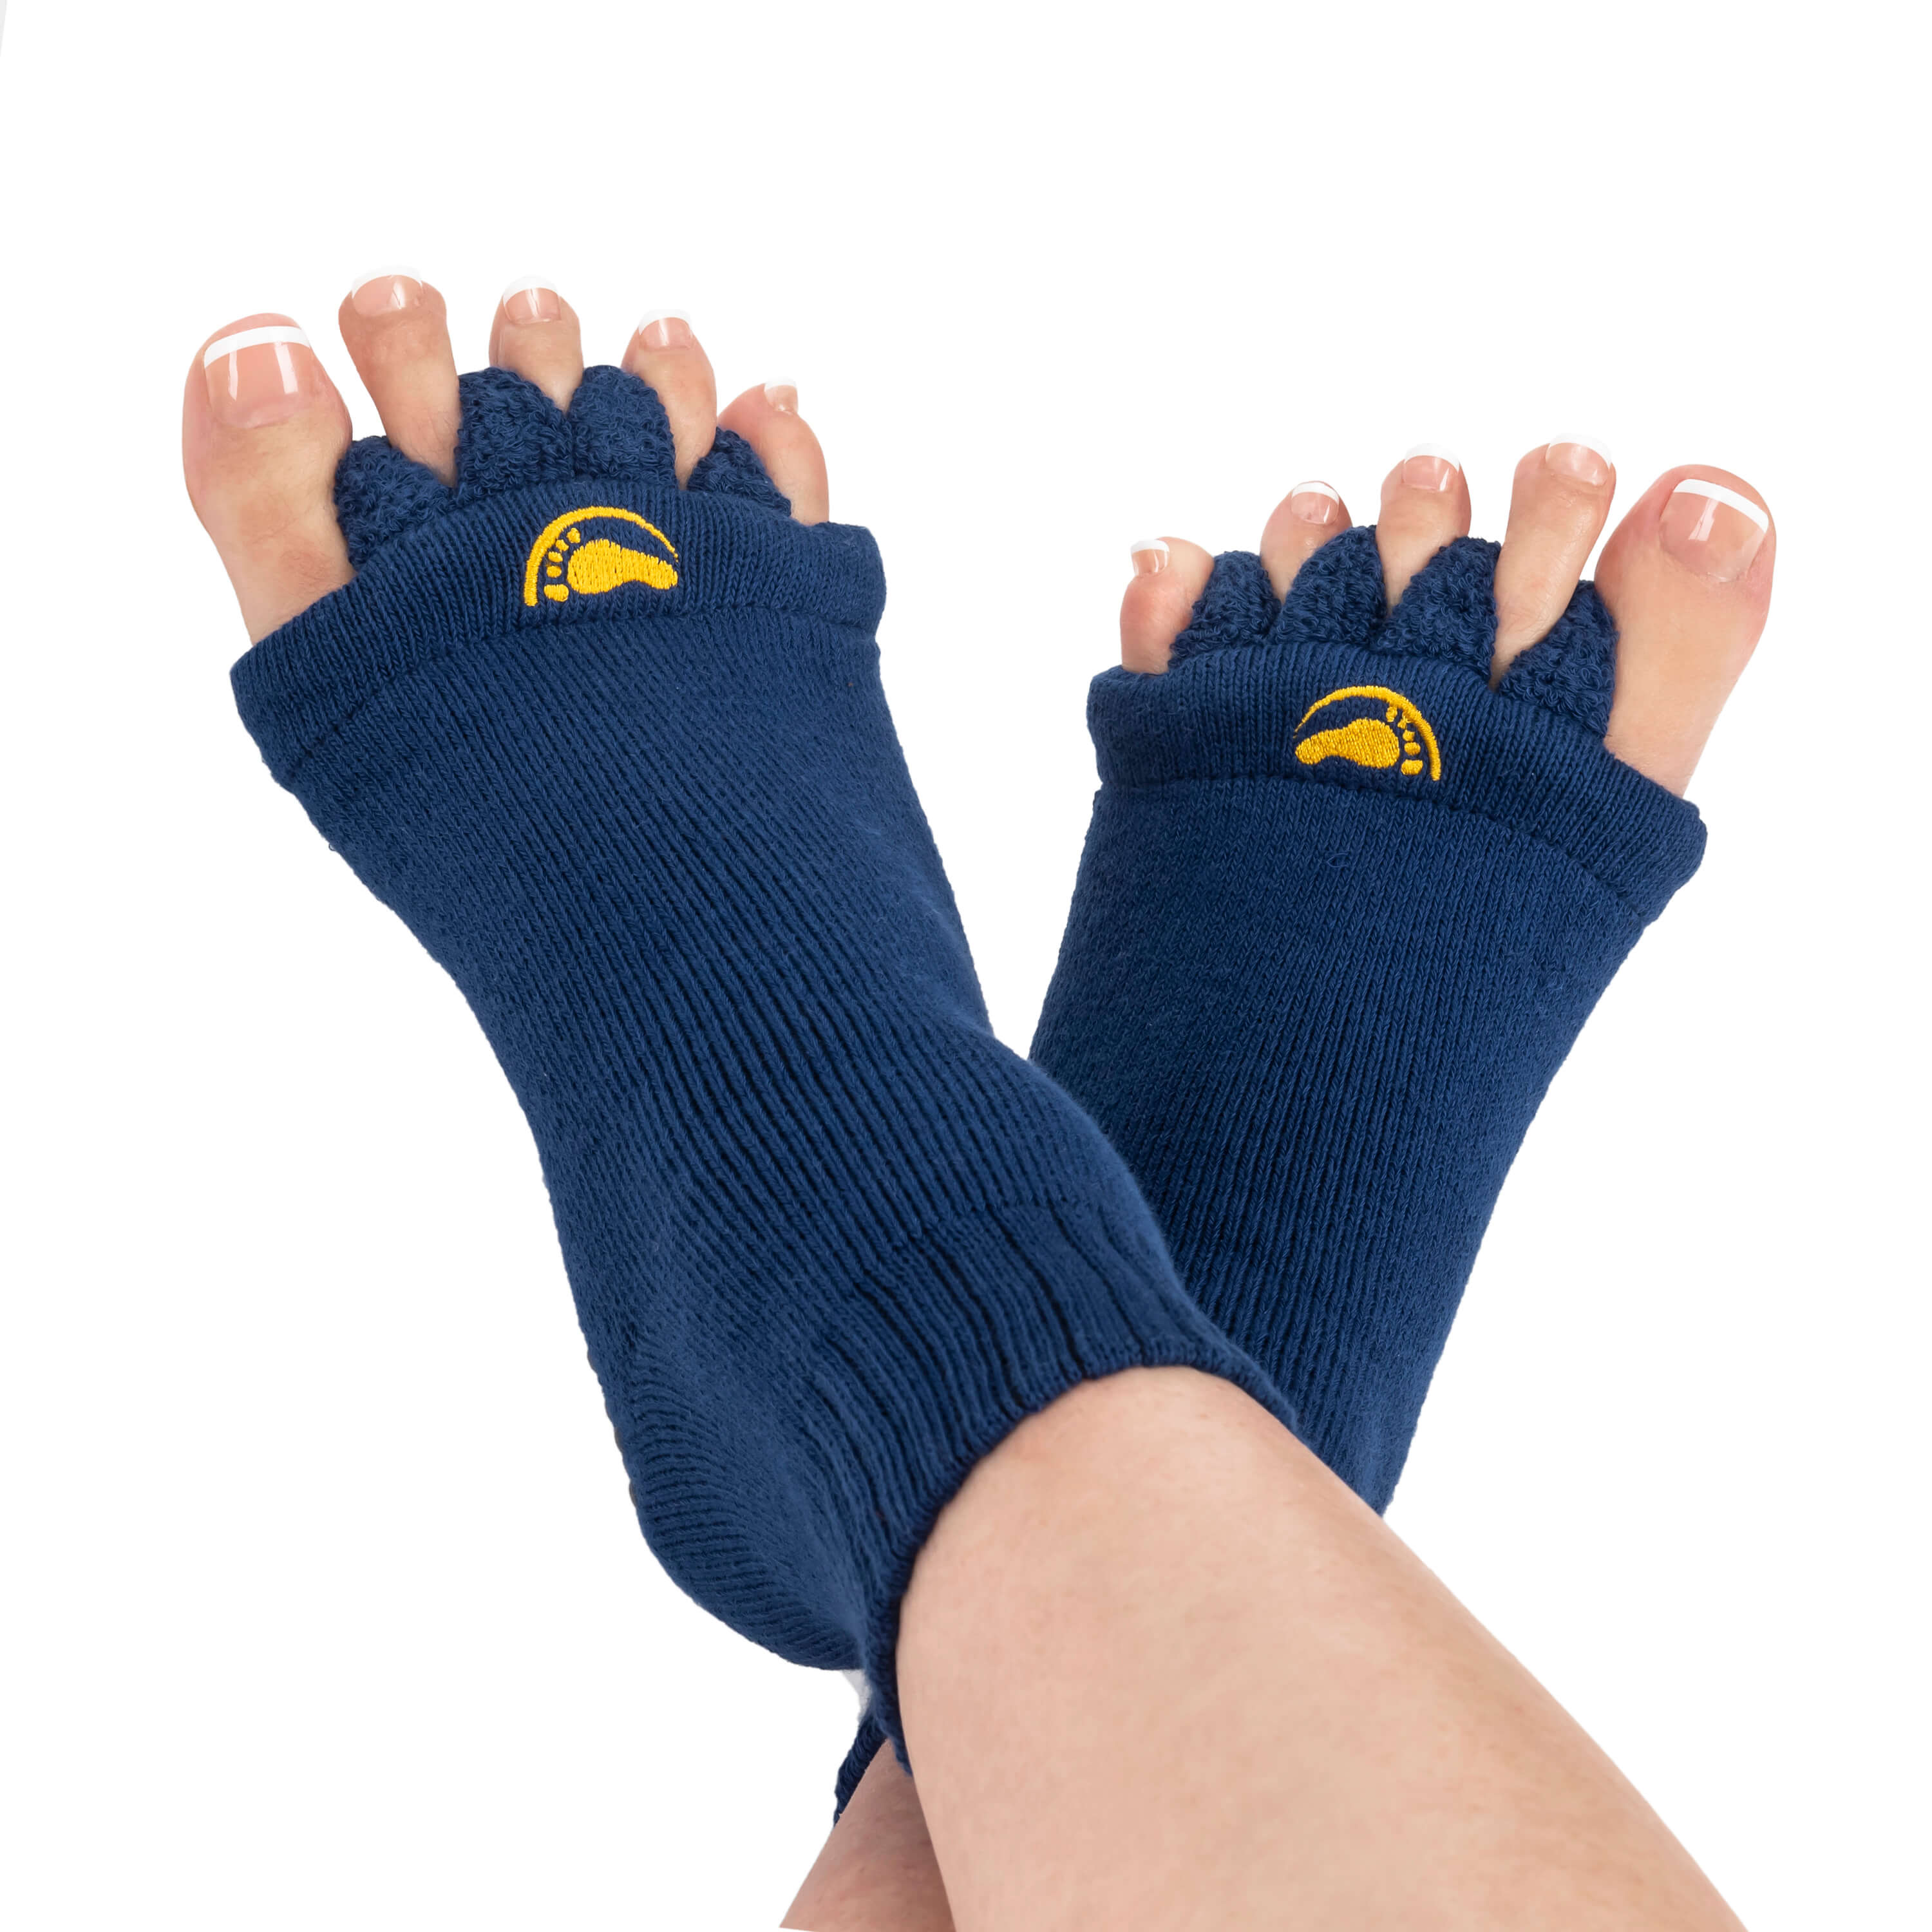 Step Up Your Foot Care Game with DIRTS Alignment Socks 